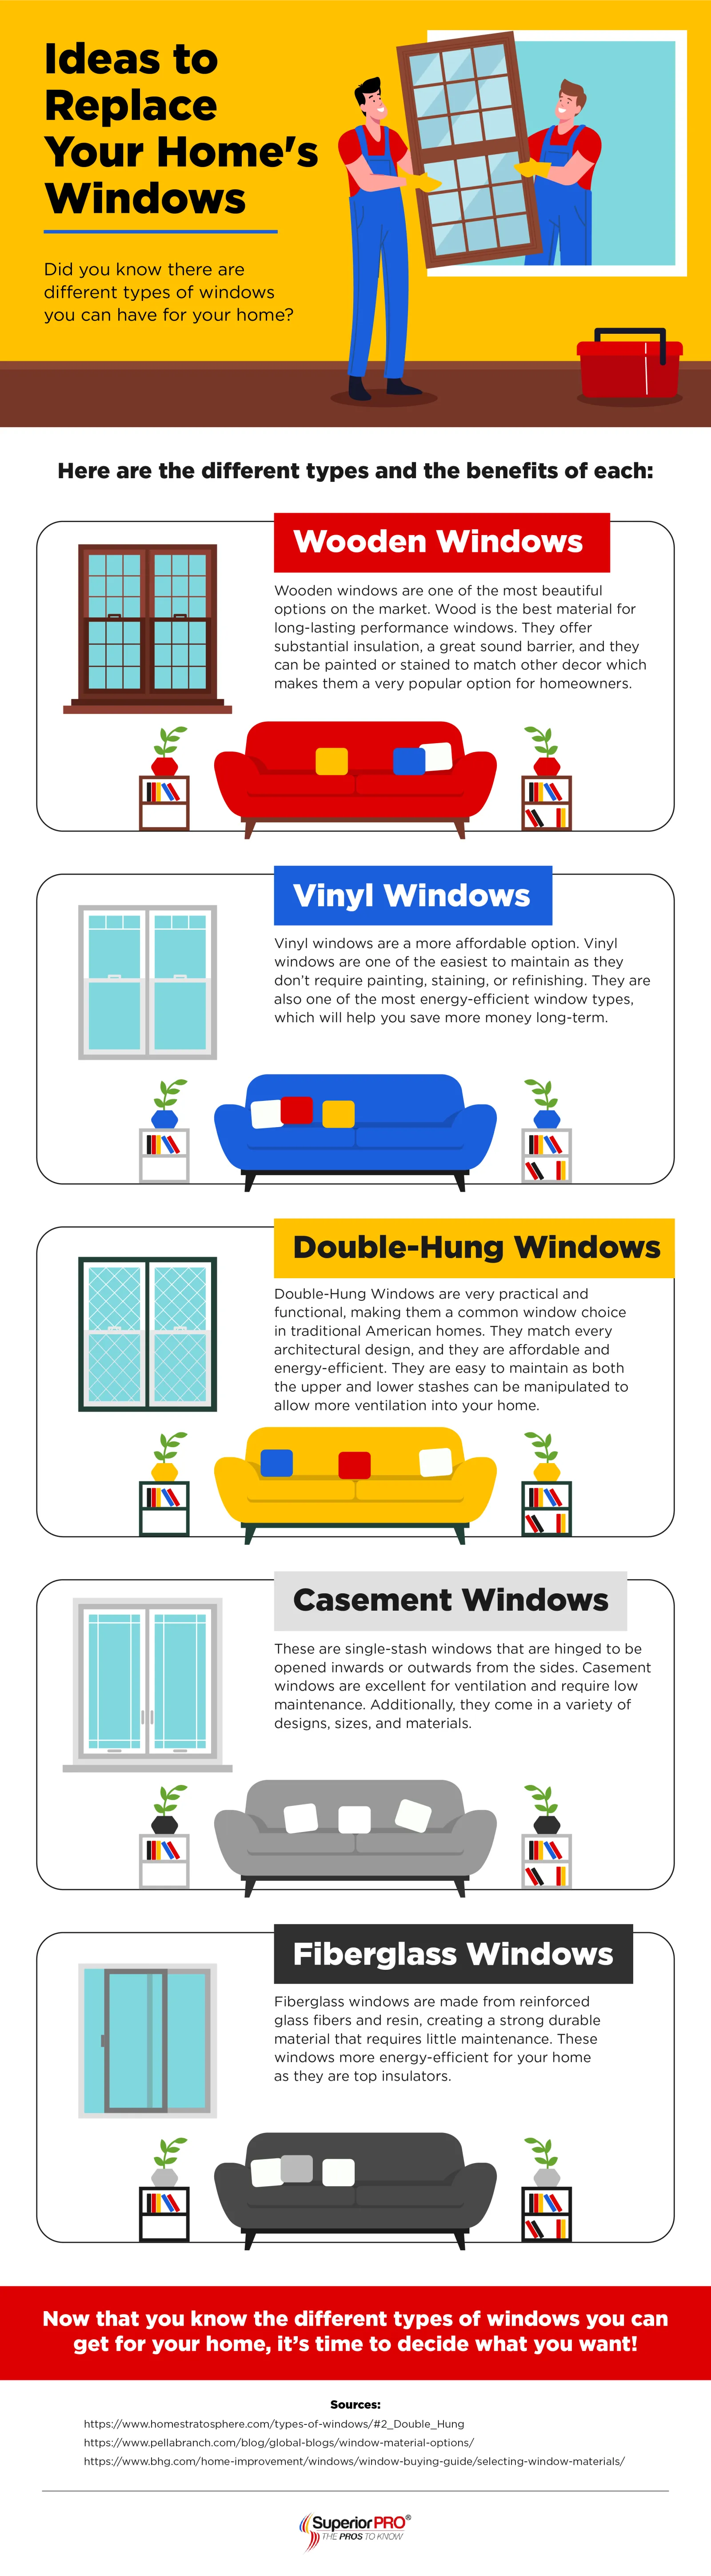 Ideas to Replace Your Home Windows 